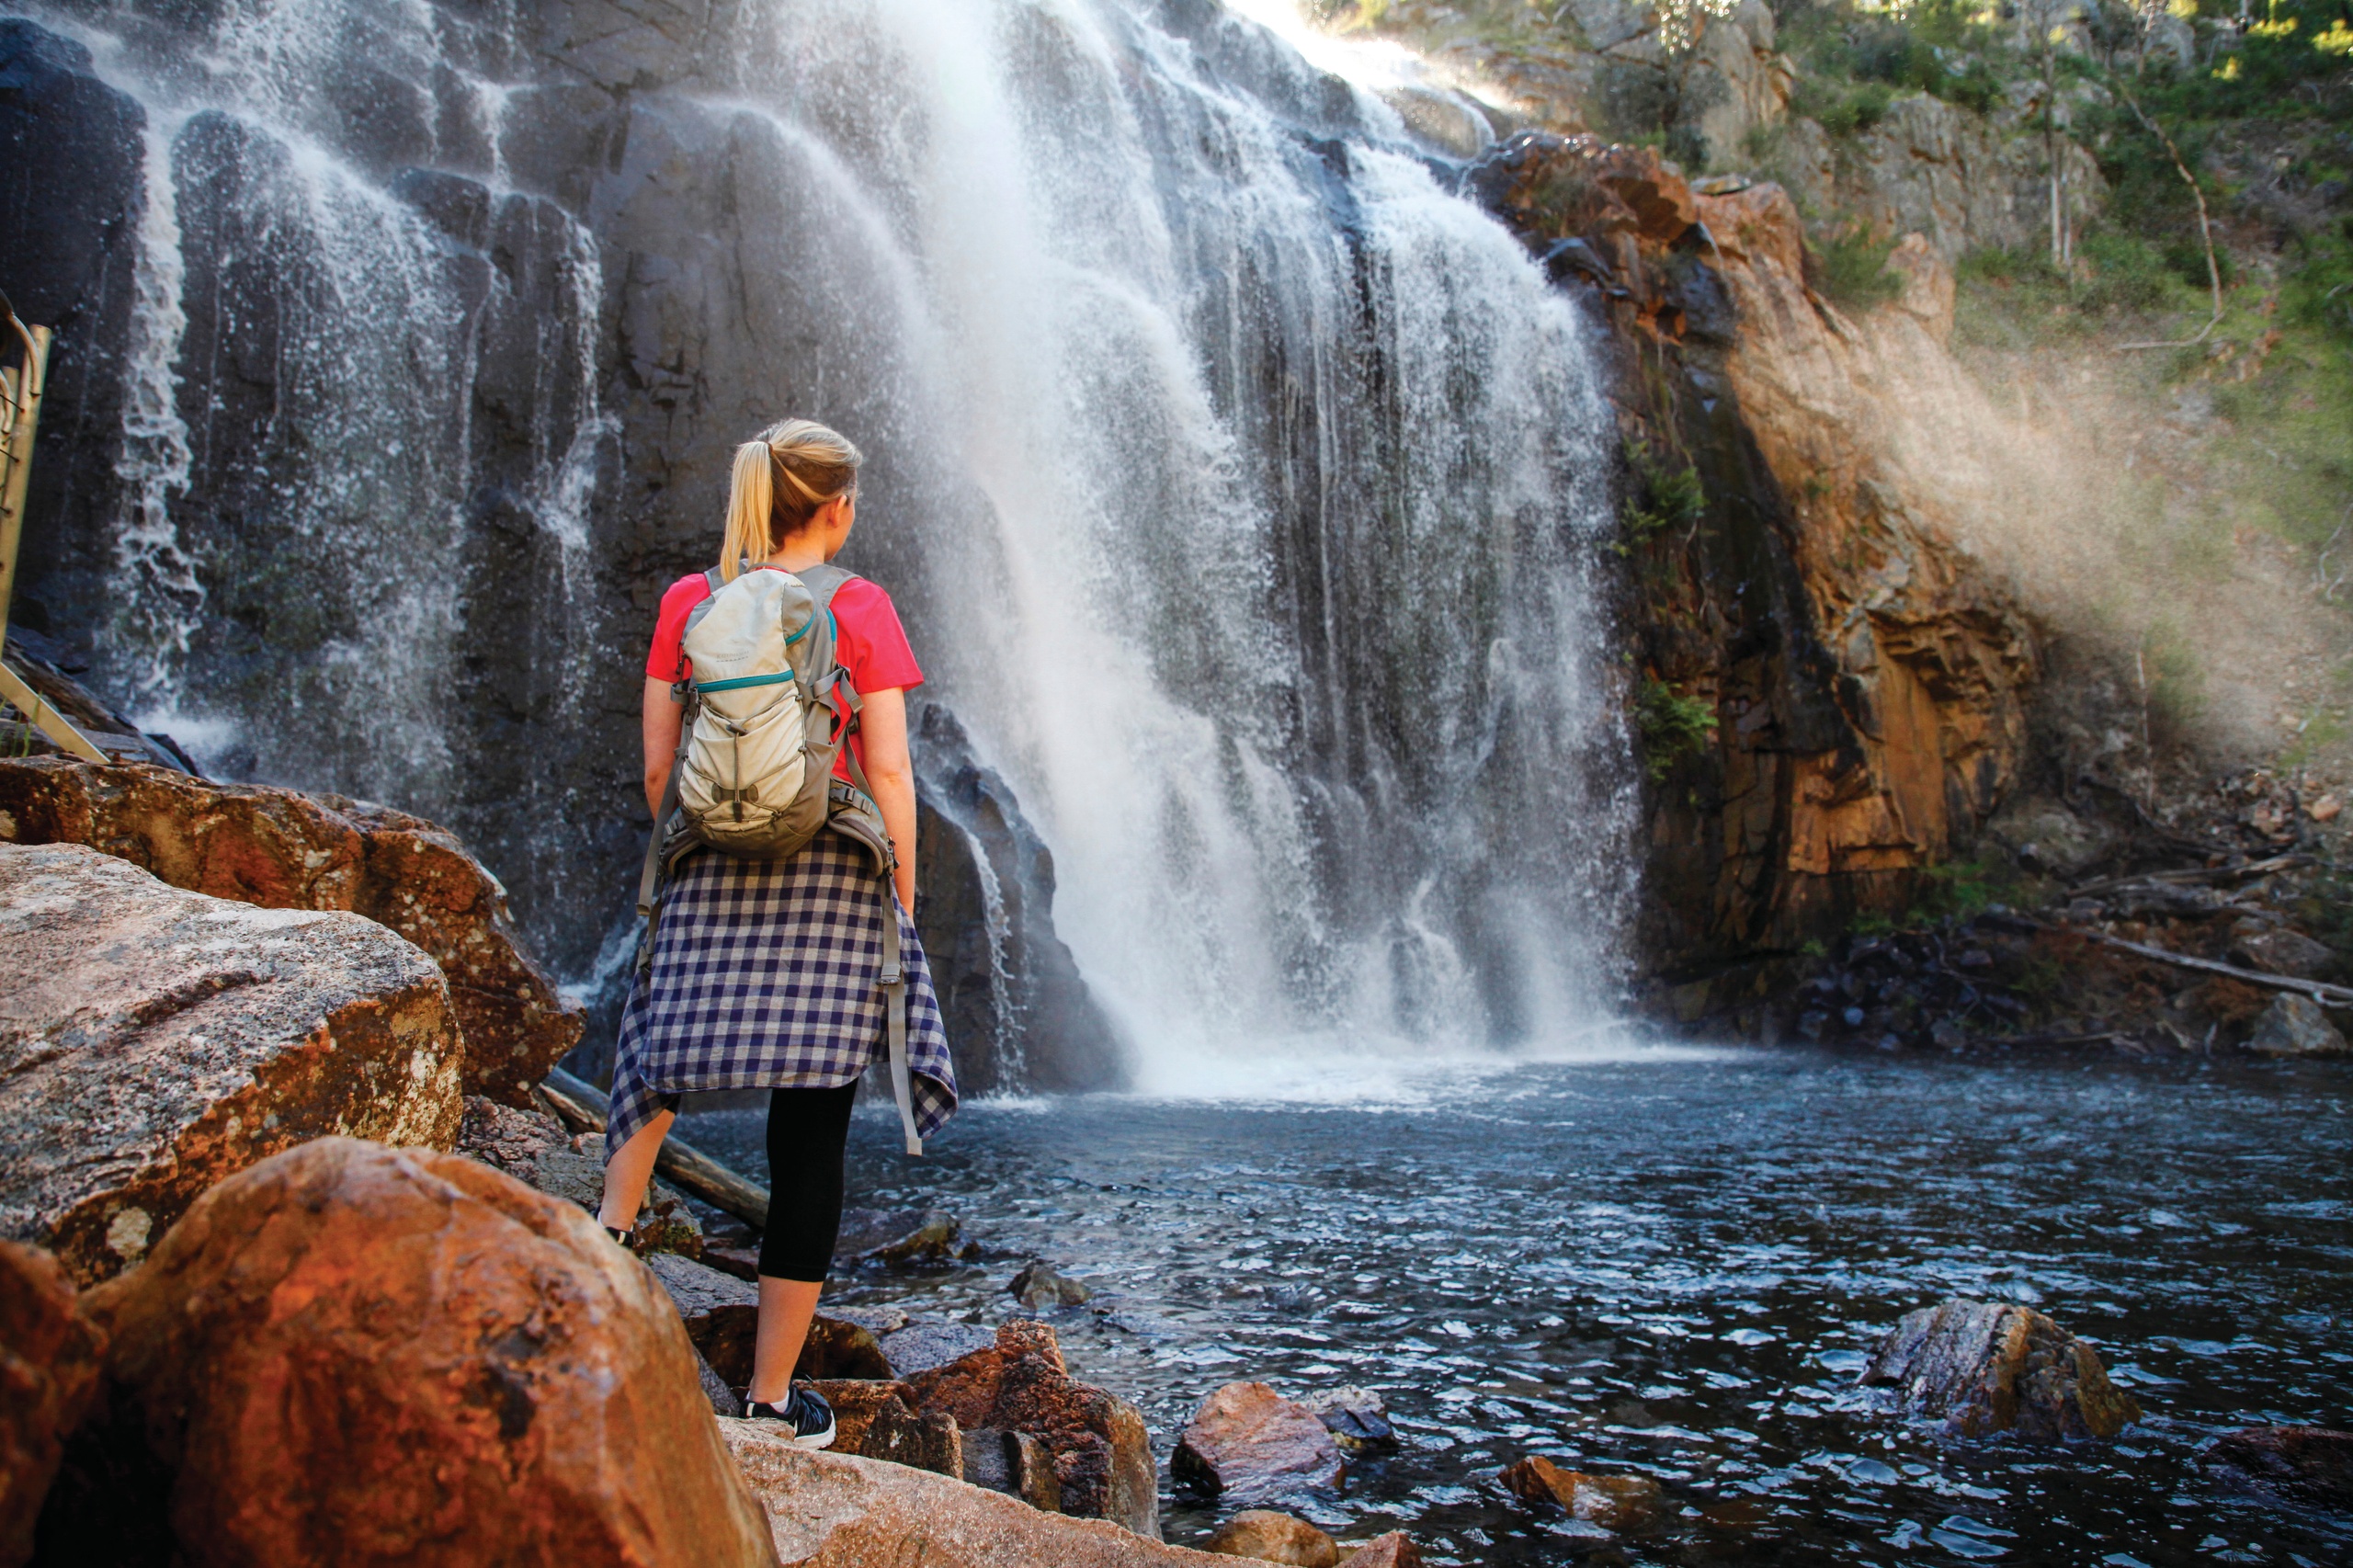 1-Day tour to Explore the Magnificent Grampians National Park | Silverband Falls | Wonderland Turntable | Grand Canyon | MacKenzie Falls 